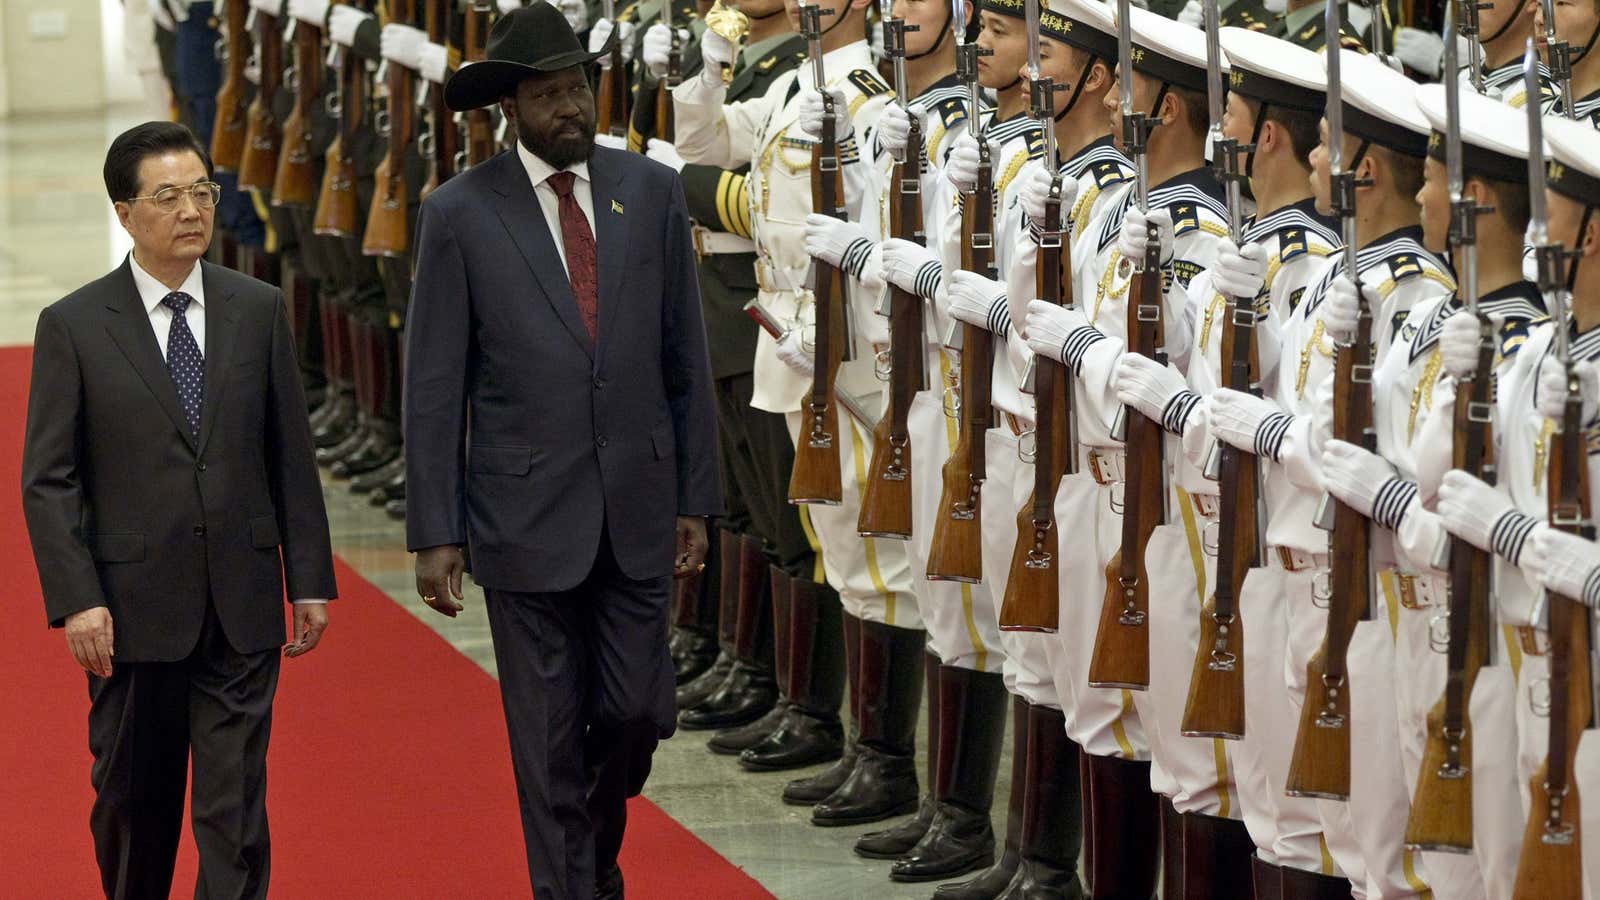 Here to learn. South Sudan’s president Salva Kiir, right. with then Chinese president Hu Jintao, left, in Beijing, China, April 2012.